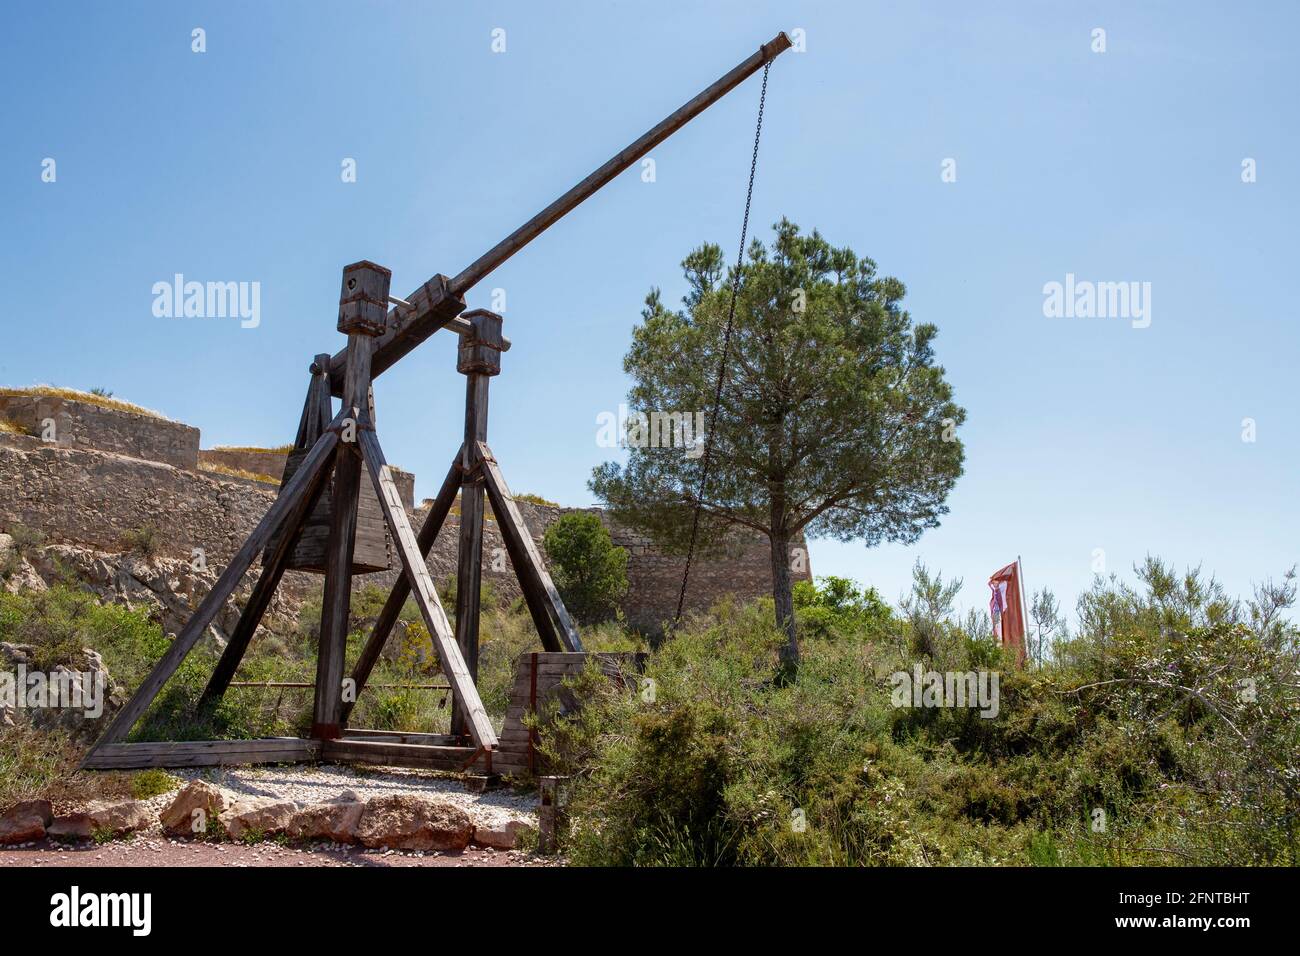 In the castle of Lorca, Murcia, Spain. There is a medieval catapult, a military instrument used in ancient times for the remote launching of large obj Stock Photo